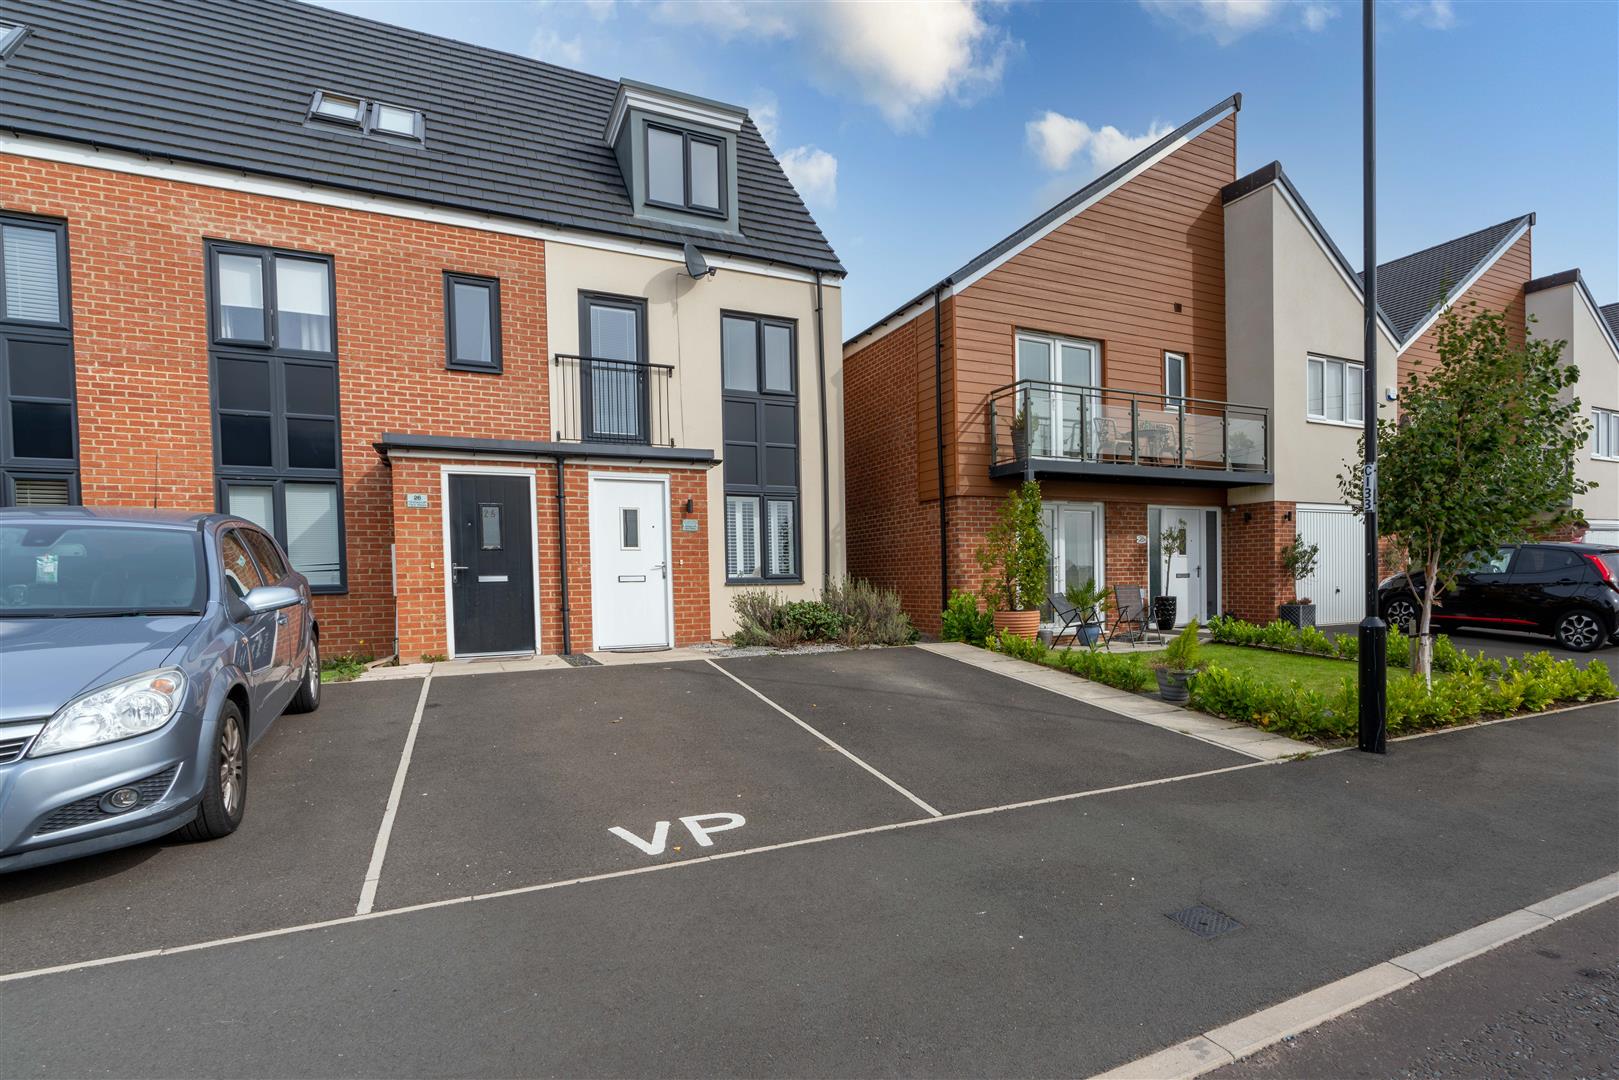 3 bed town house for sale in Elmwood Park Mews, Newcastle Upon Tyne, NE13